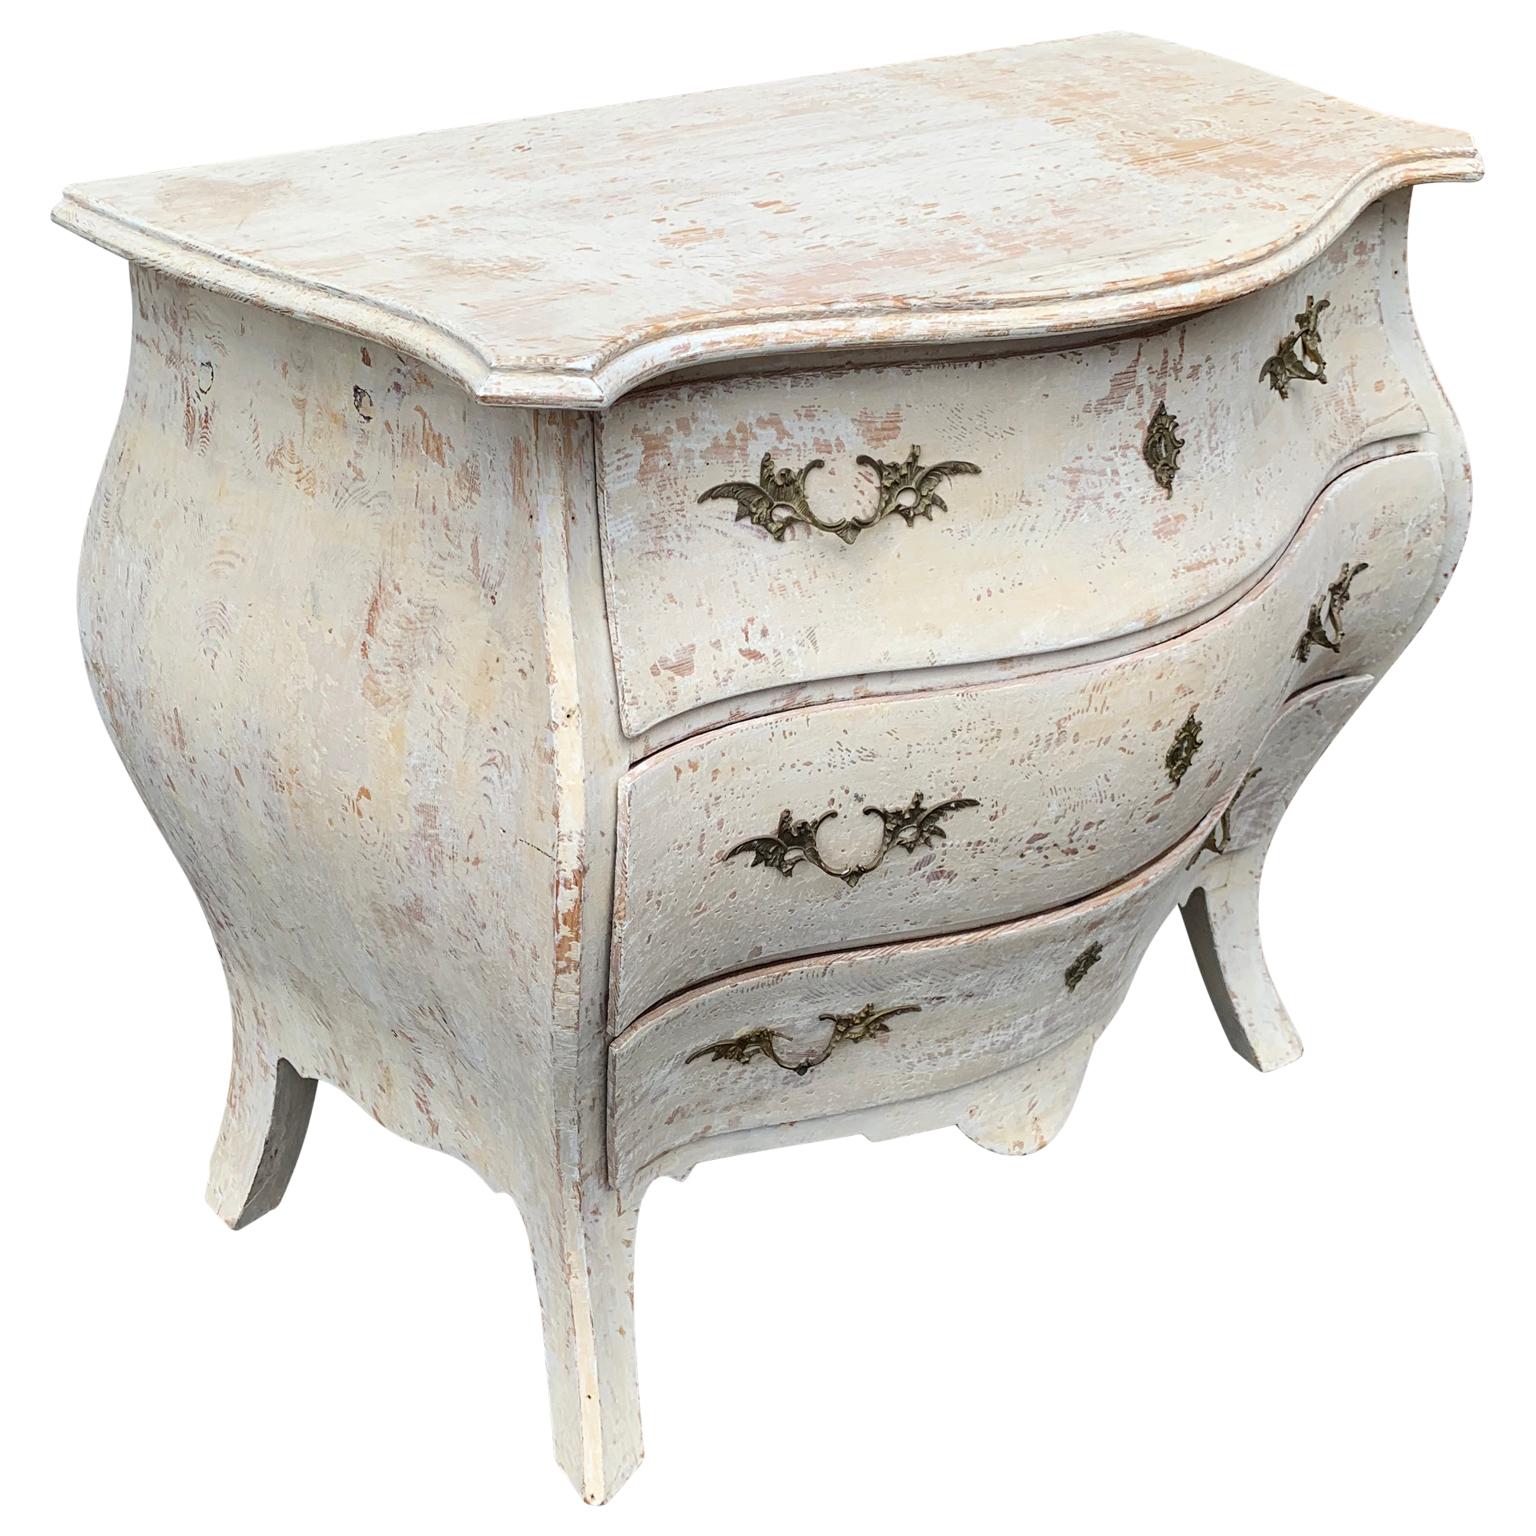 Rococo 19th Century Gustavian Painted Bombè Chest of Drawers, Sweden